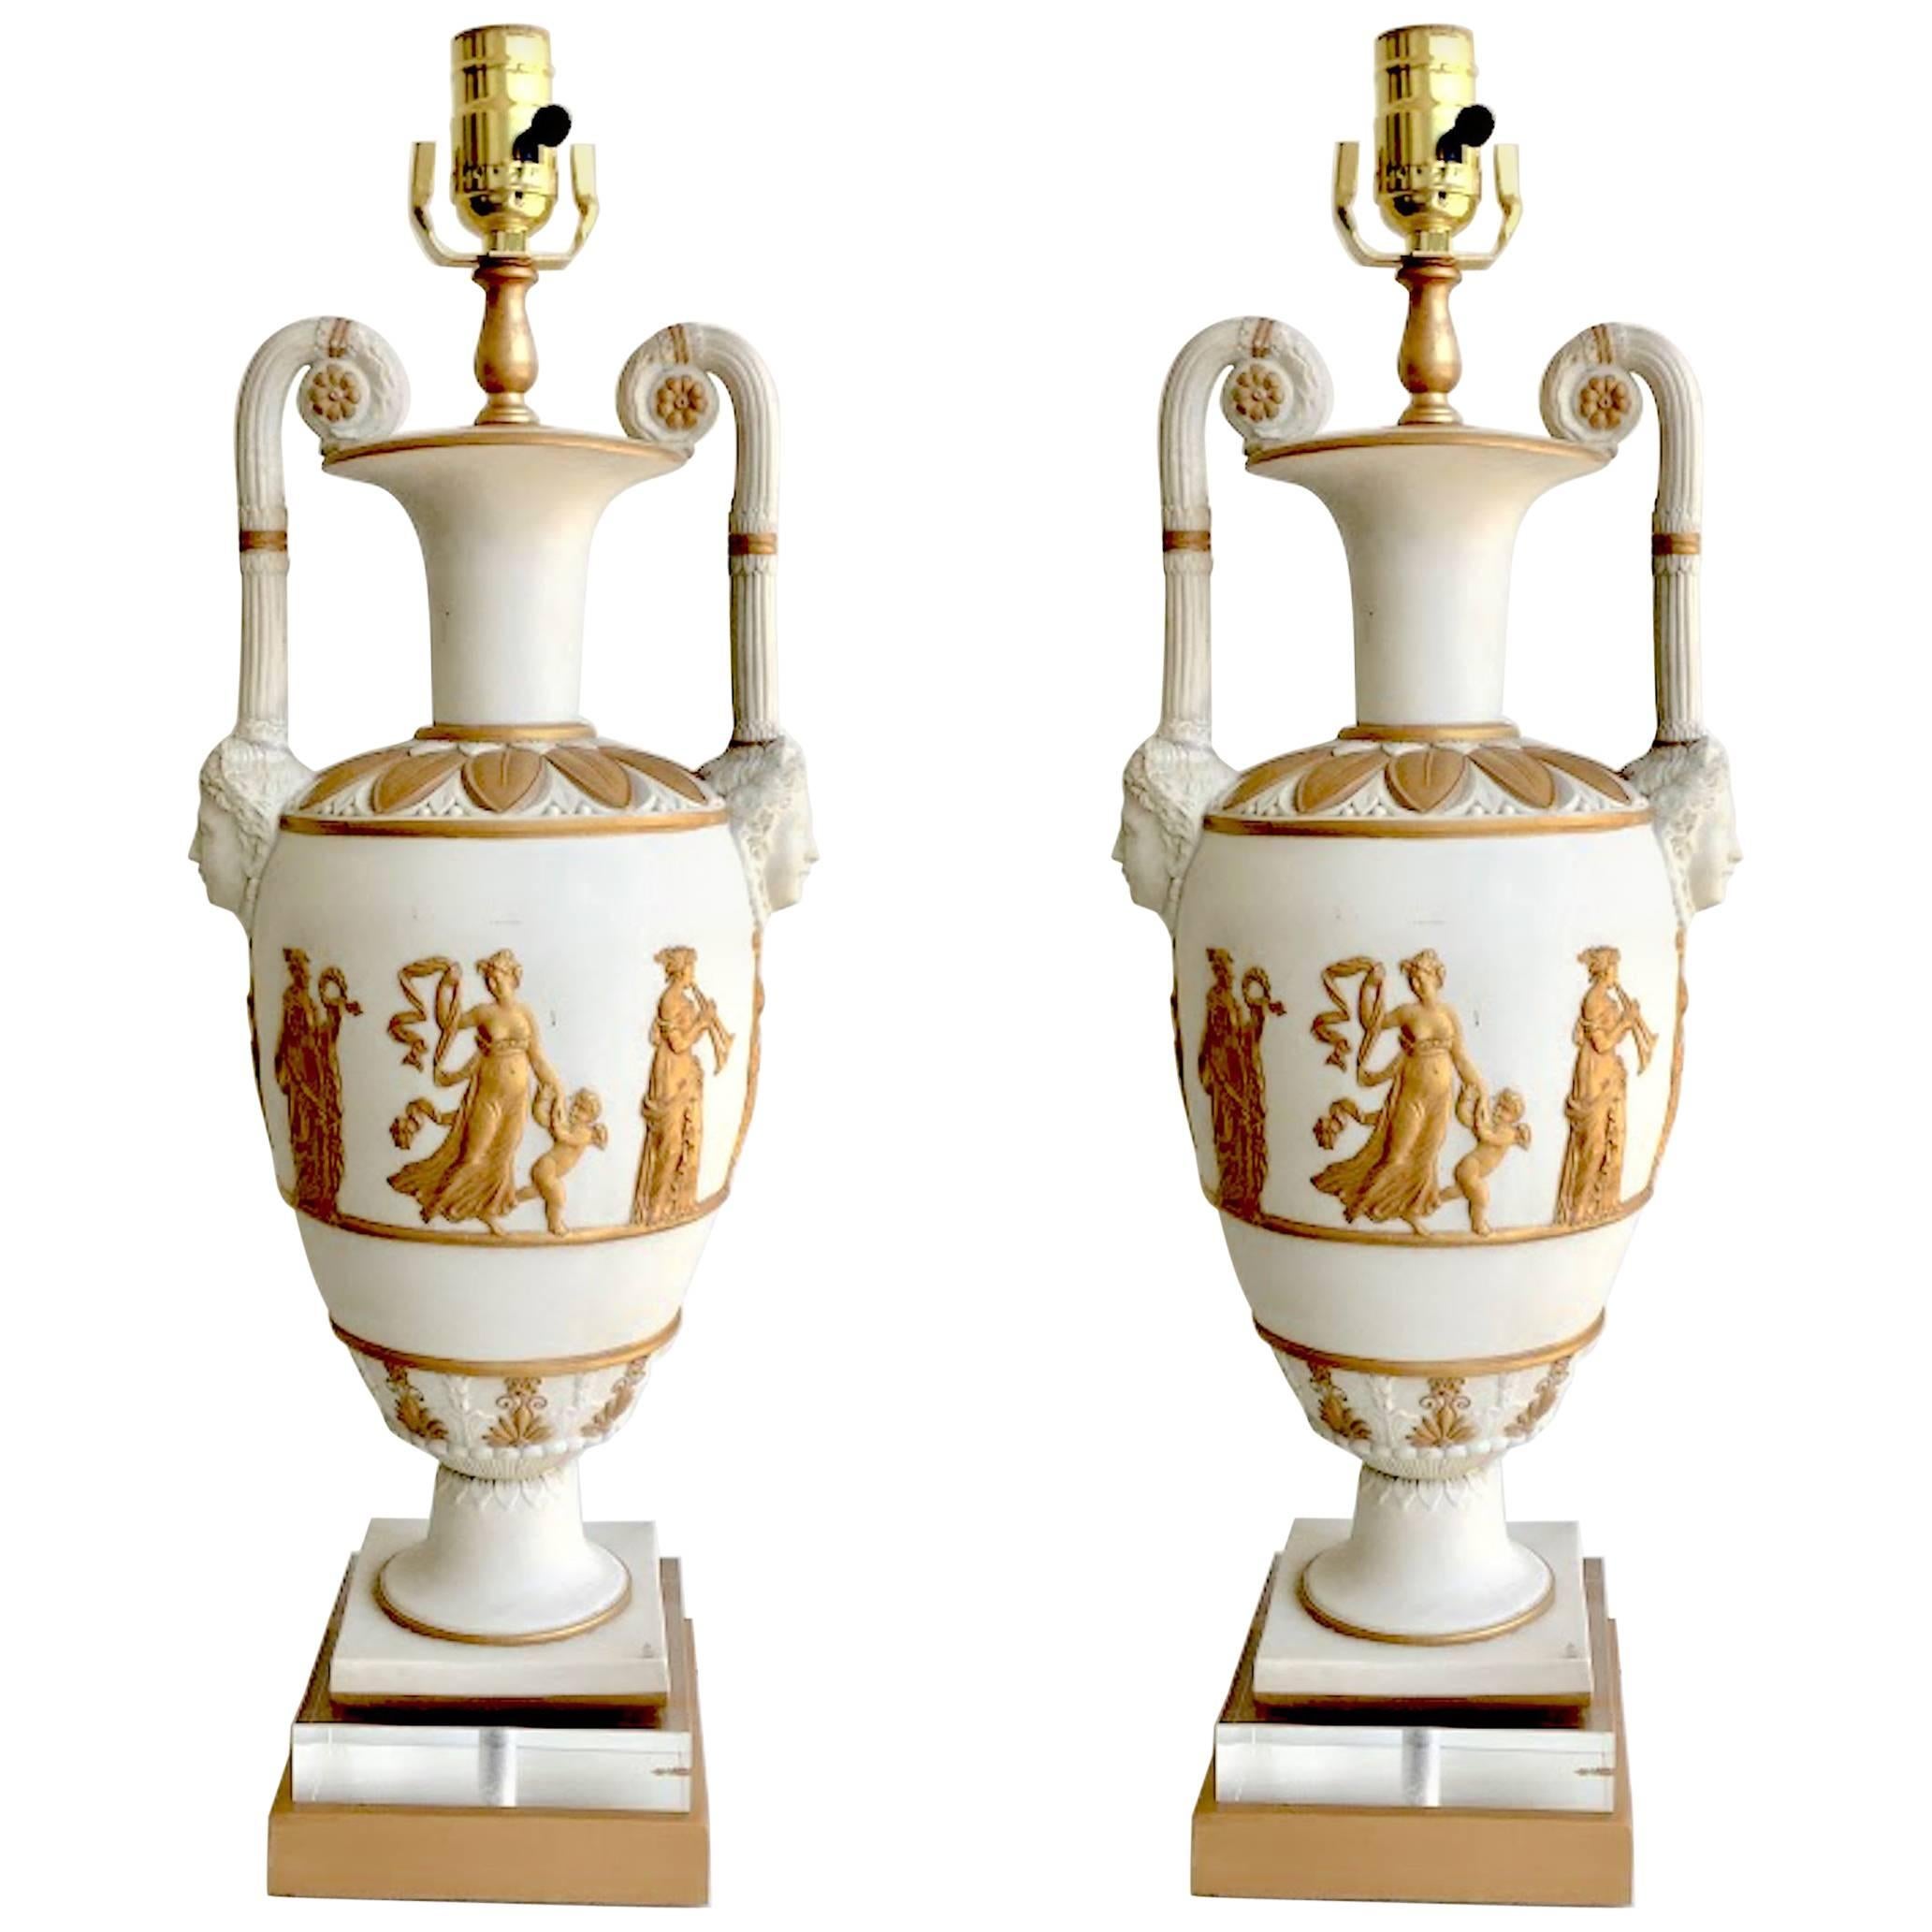 Pair of Neoclassic Continental White & Gilt Basalt Vases/ Lamps Possibly Danish